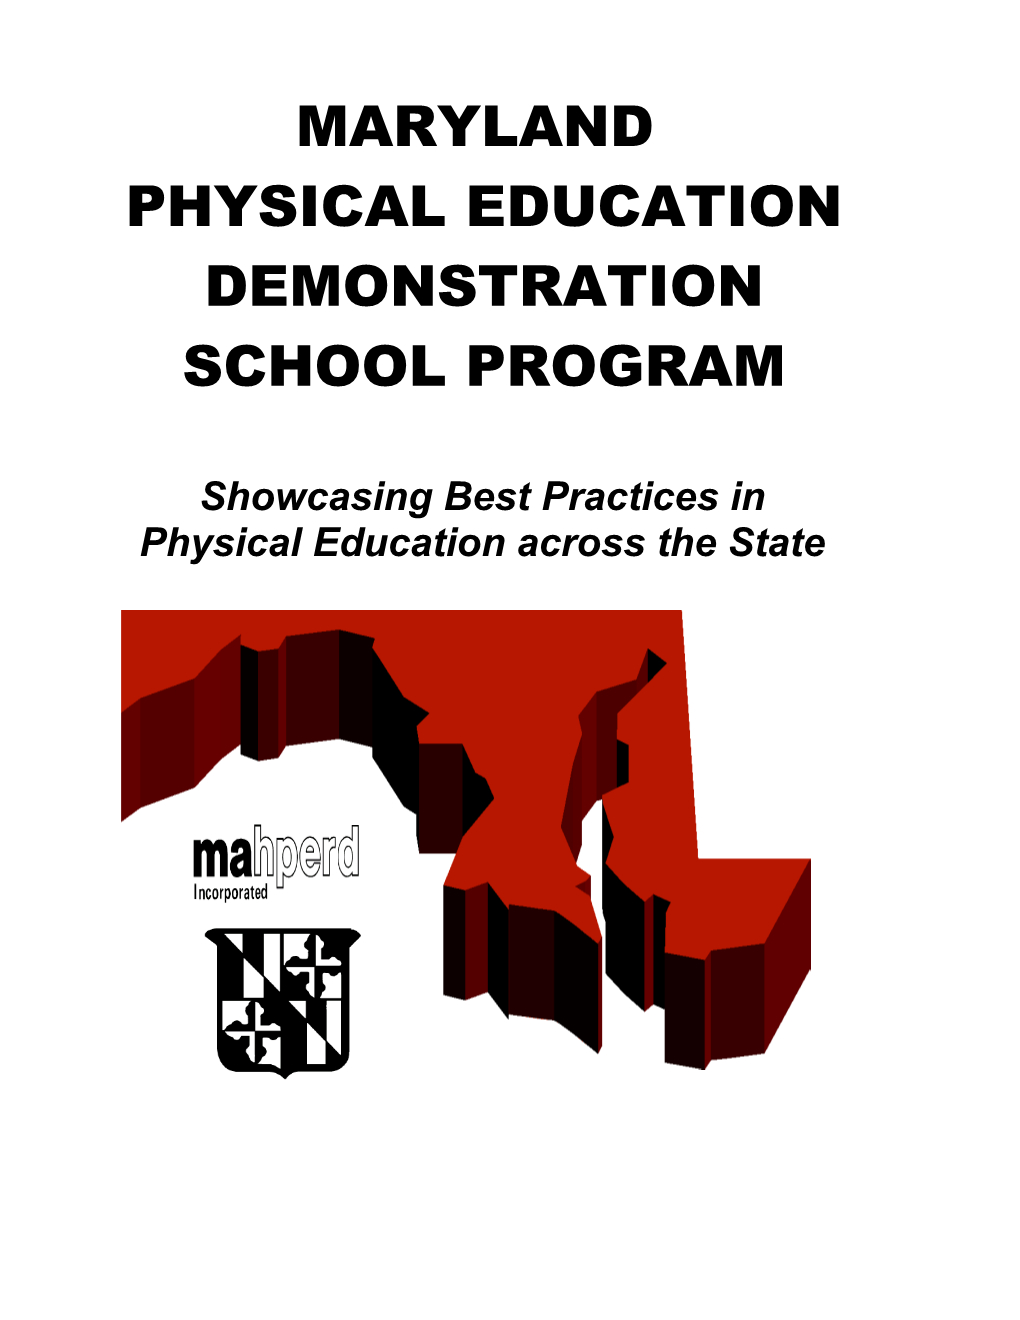 Showcasing Best Practices in Physical Education Across the State